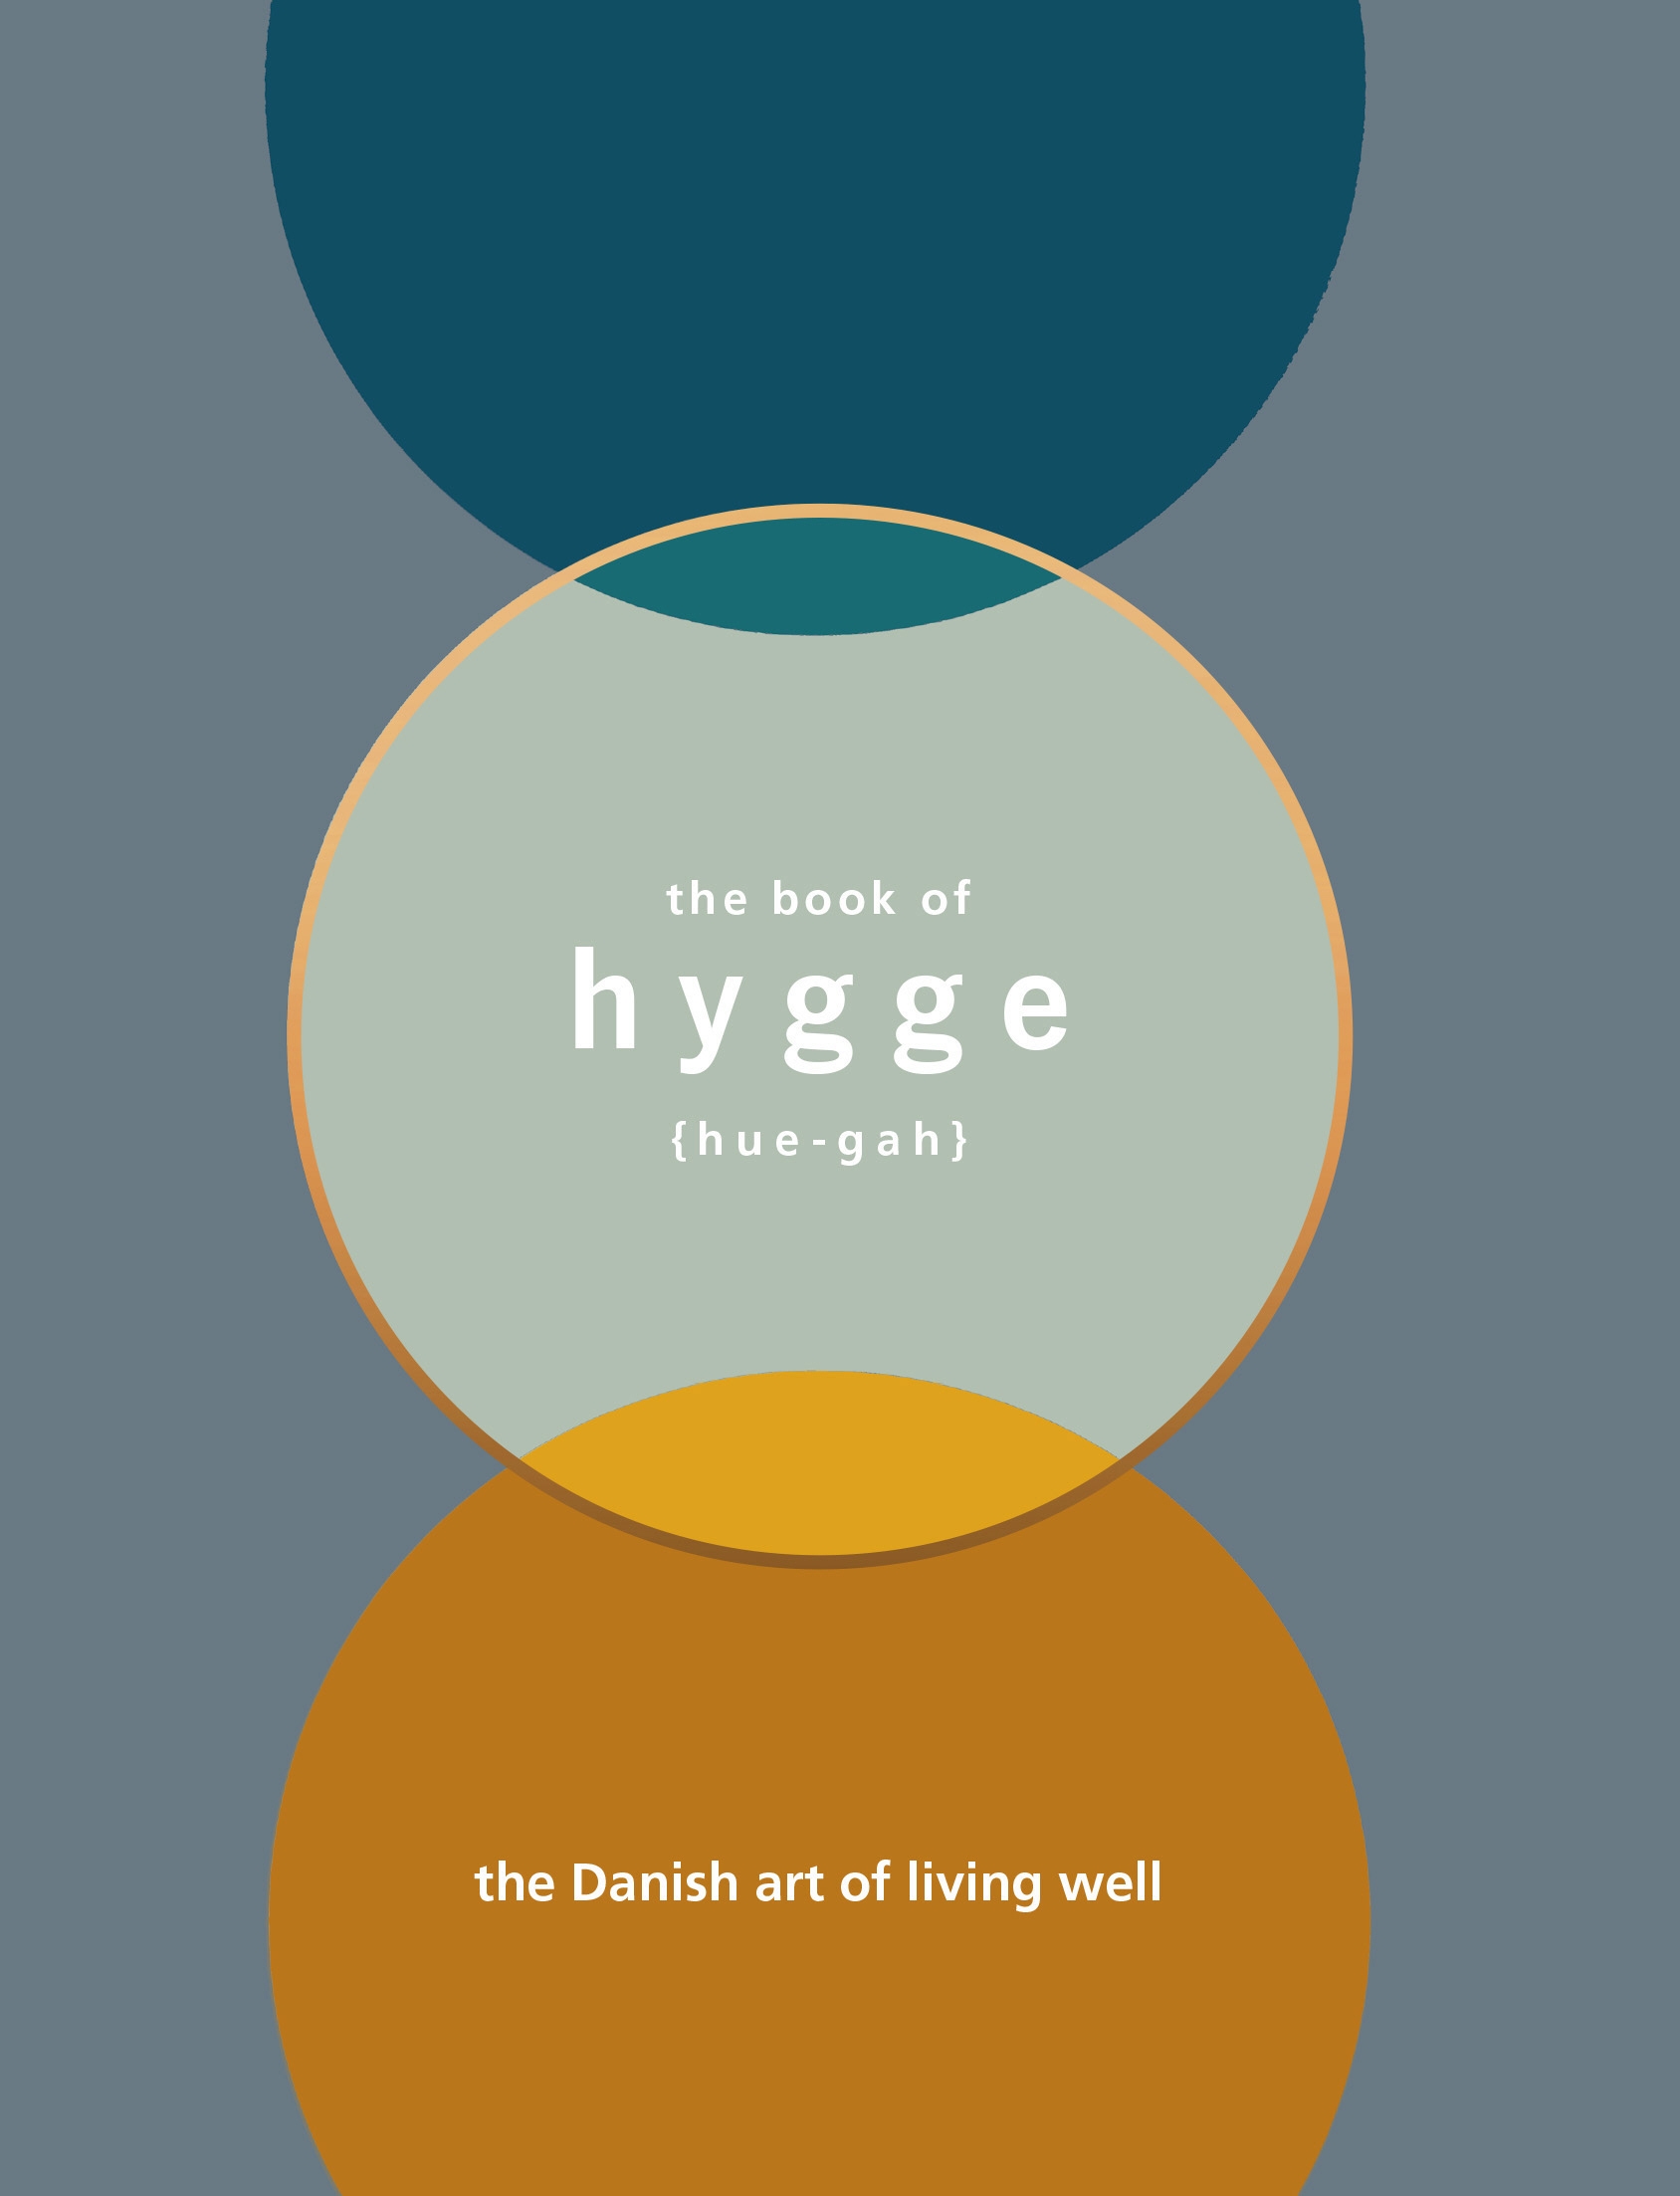 The Book of Hygge by Louisa Thomsen Brits - Penguin Books New Zealand